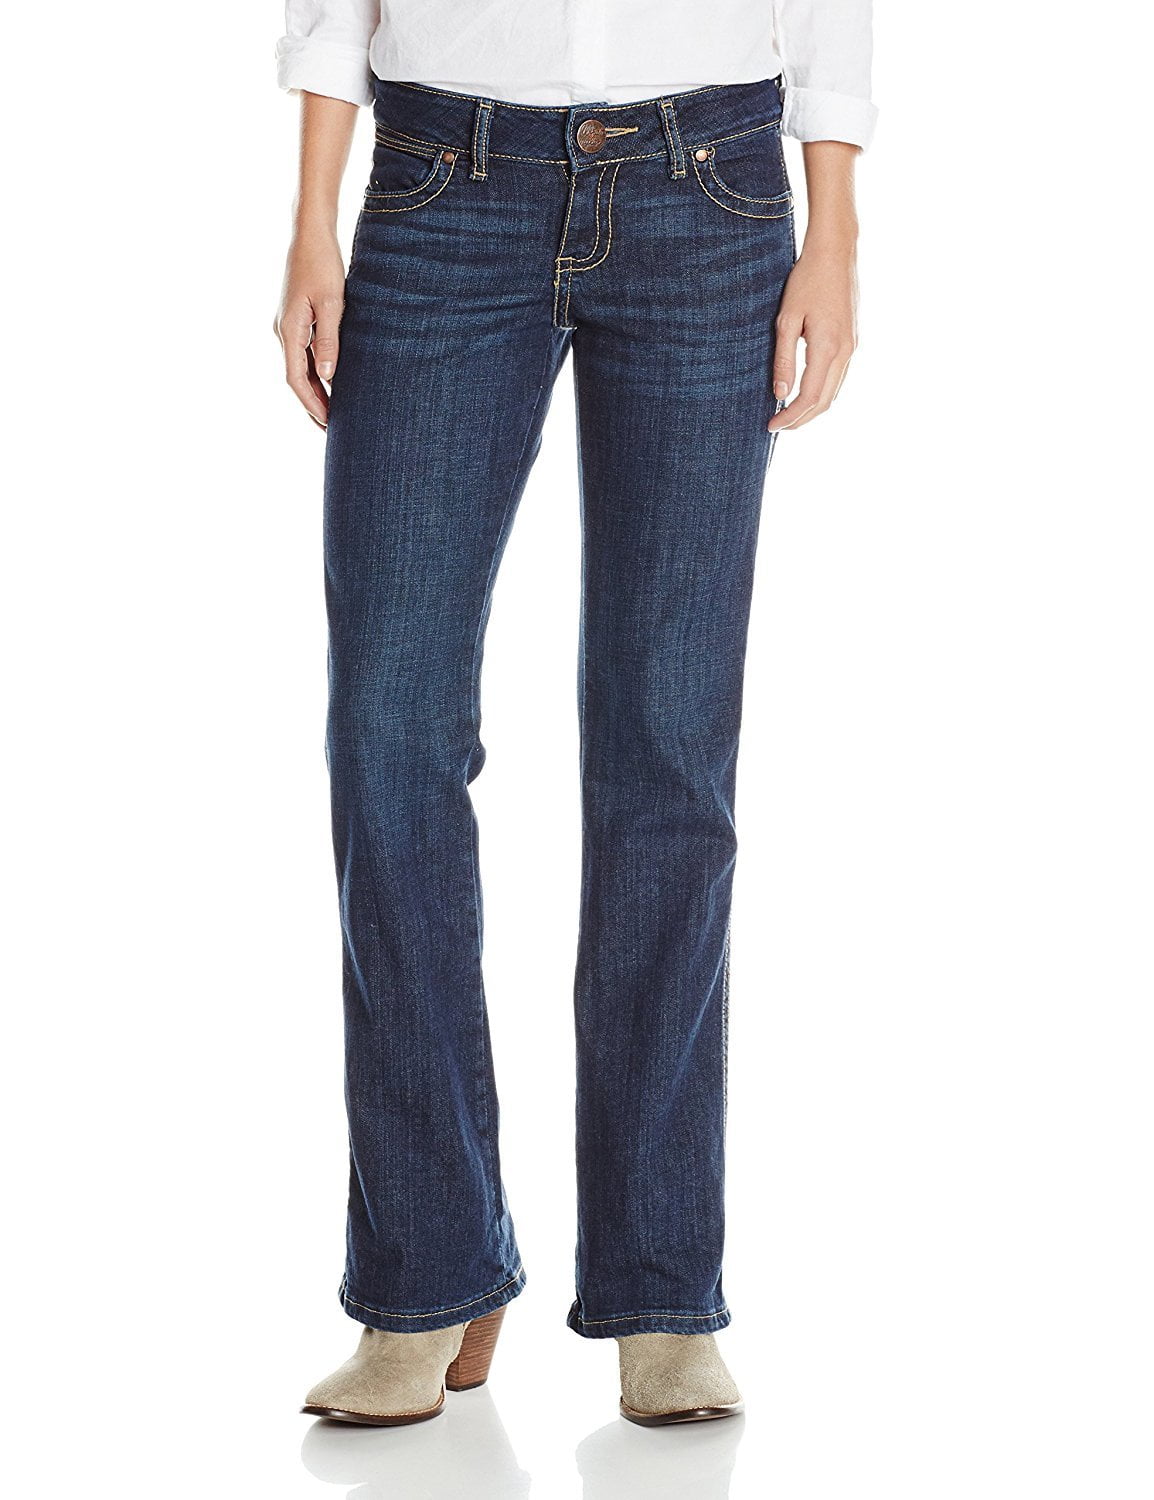 Wrangler Women's Premium Patch Mae Sits Above Hip with Back Pocket Jean ...